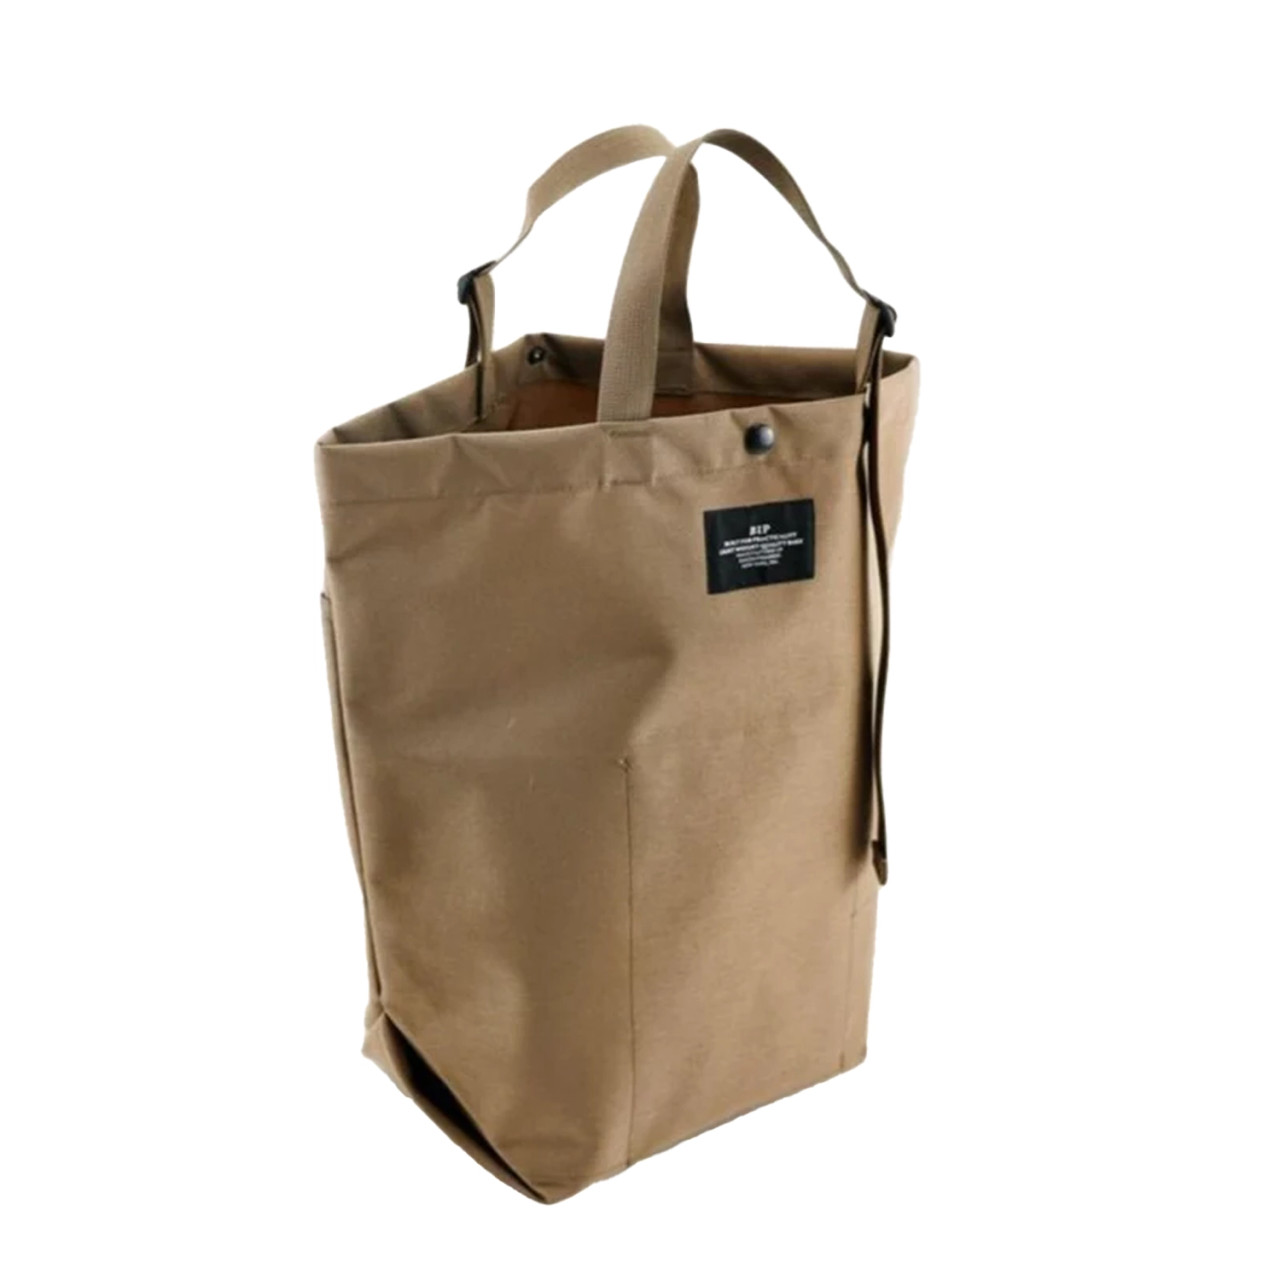 Nylon Canvas Carry-All Tote in Khaki, Bags In Progress, tomfoolery